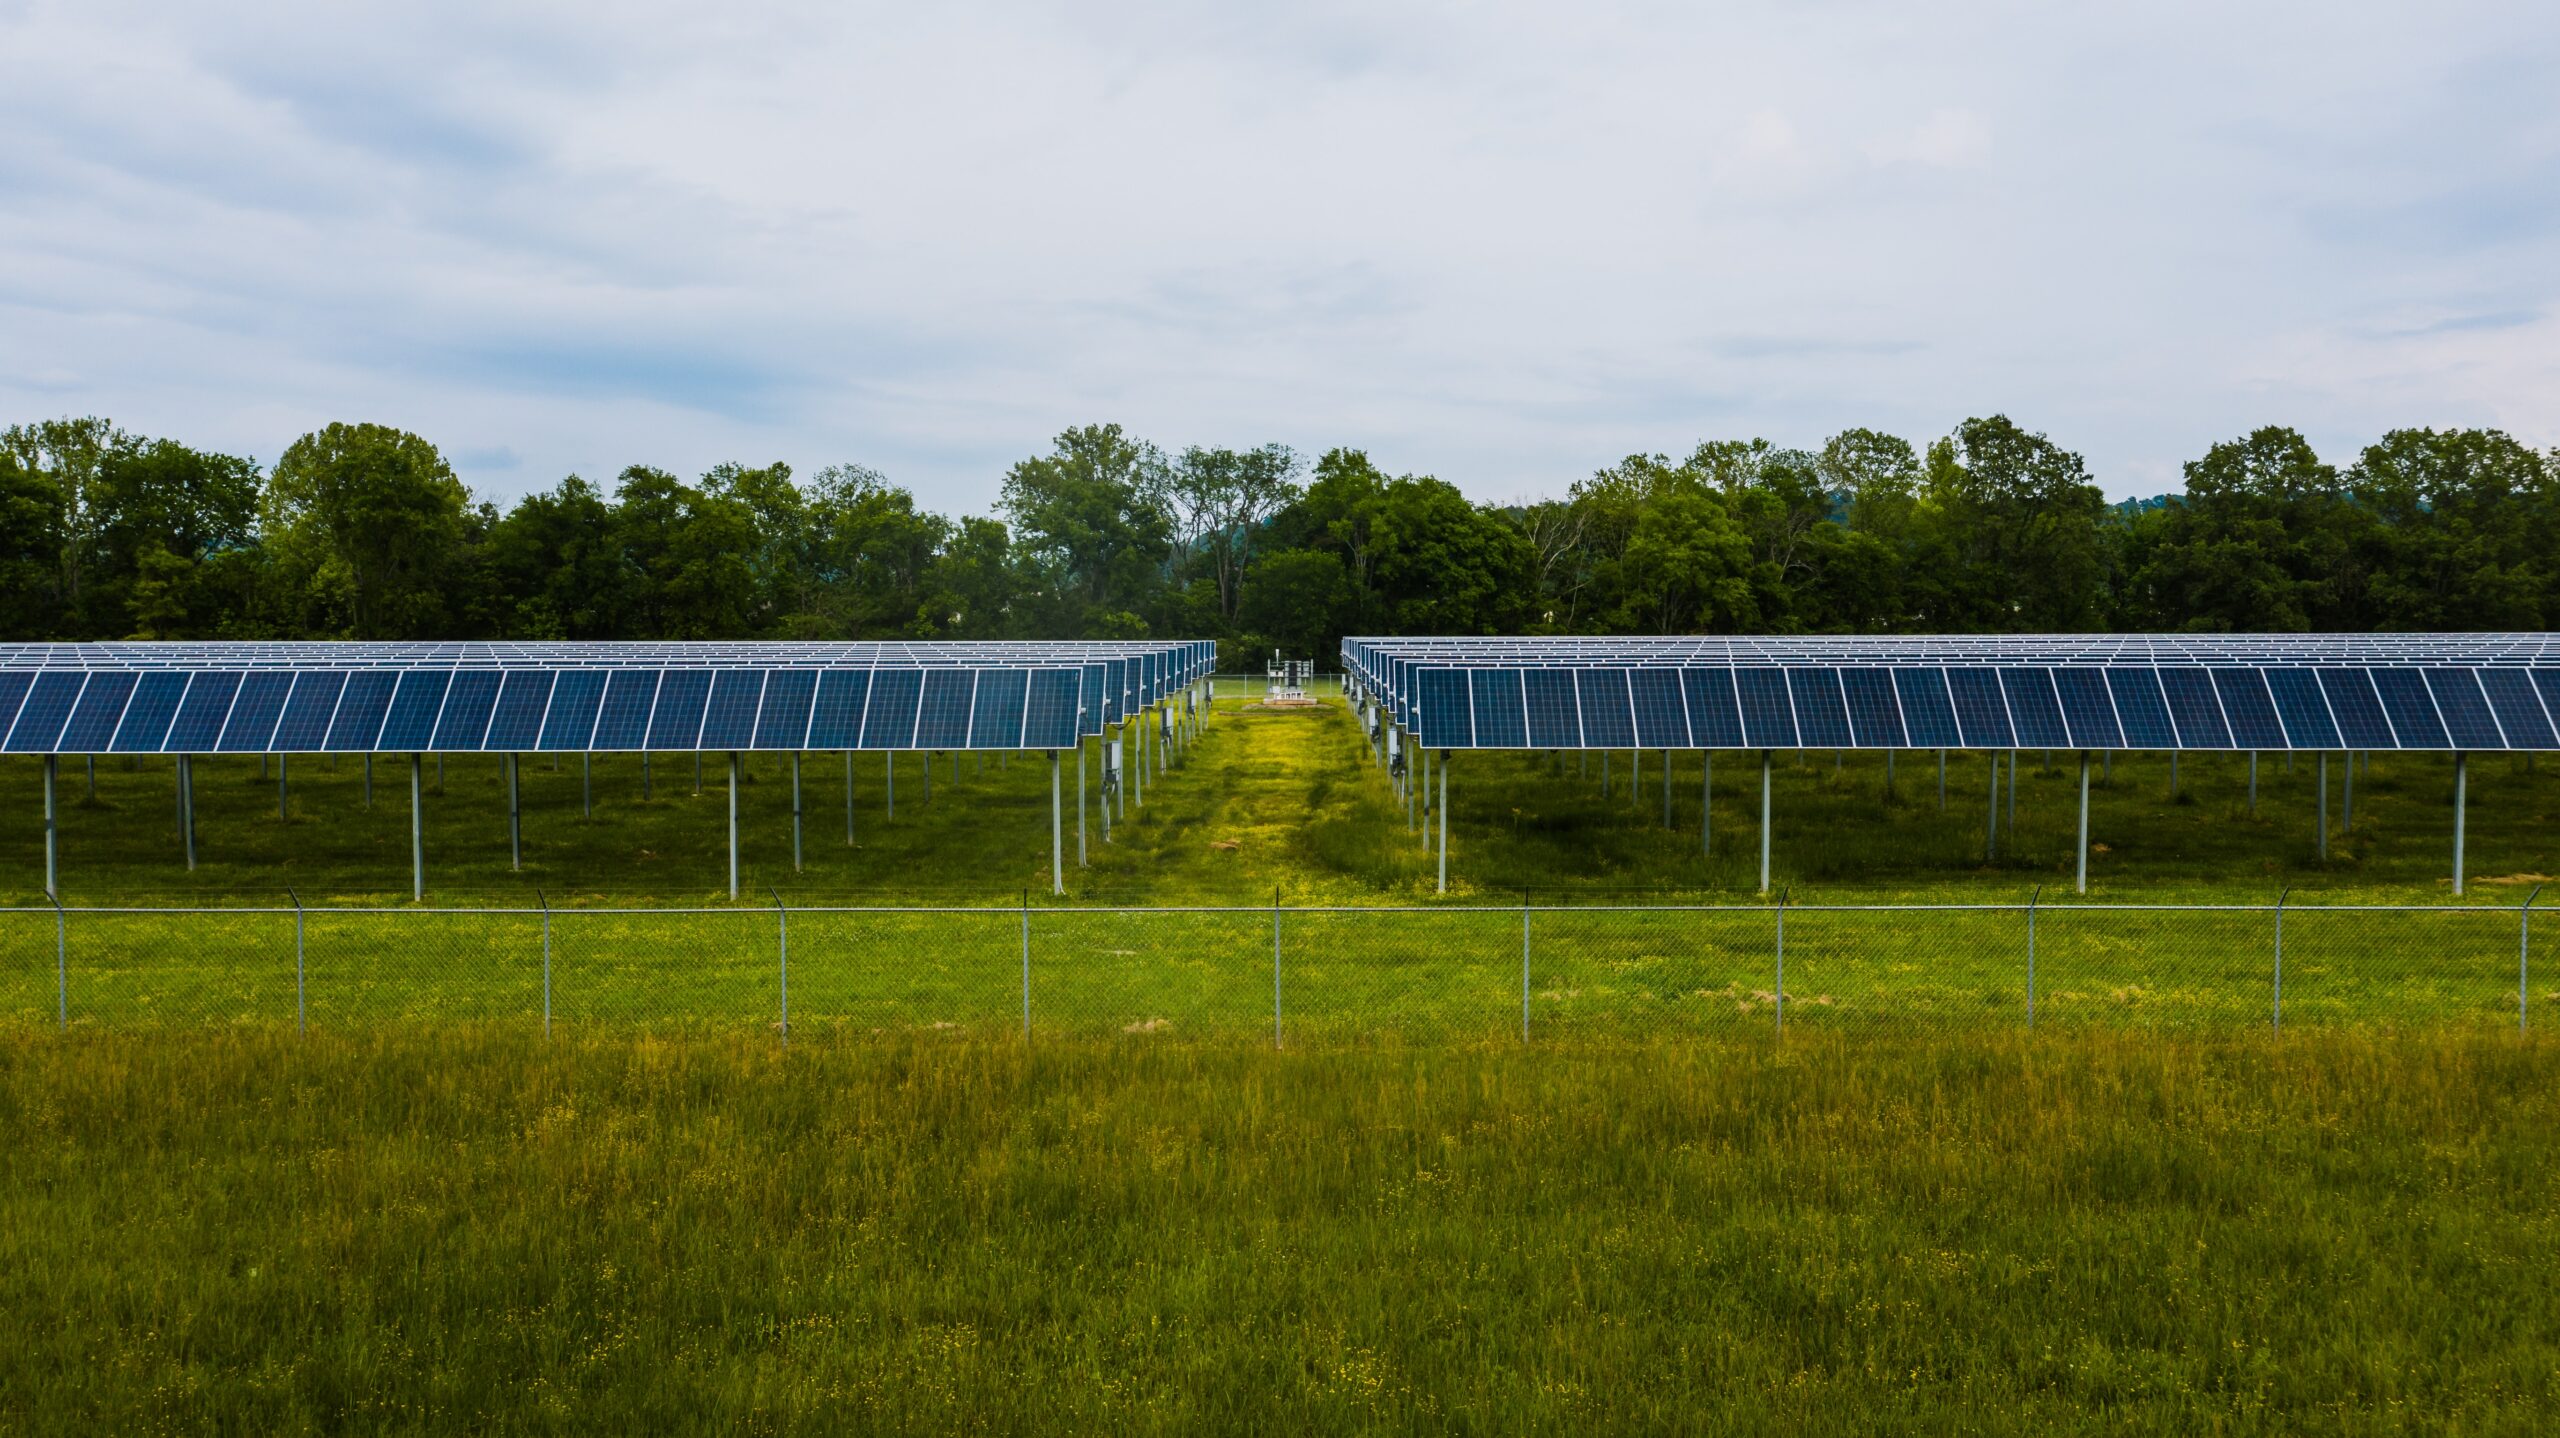 Utility Dive: “Utilities must come clean about the full value of community solar”